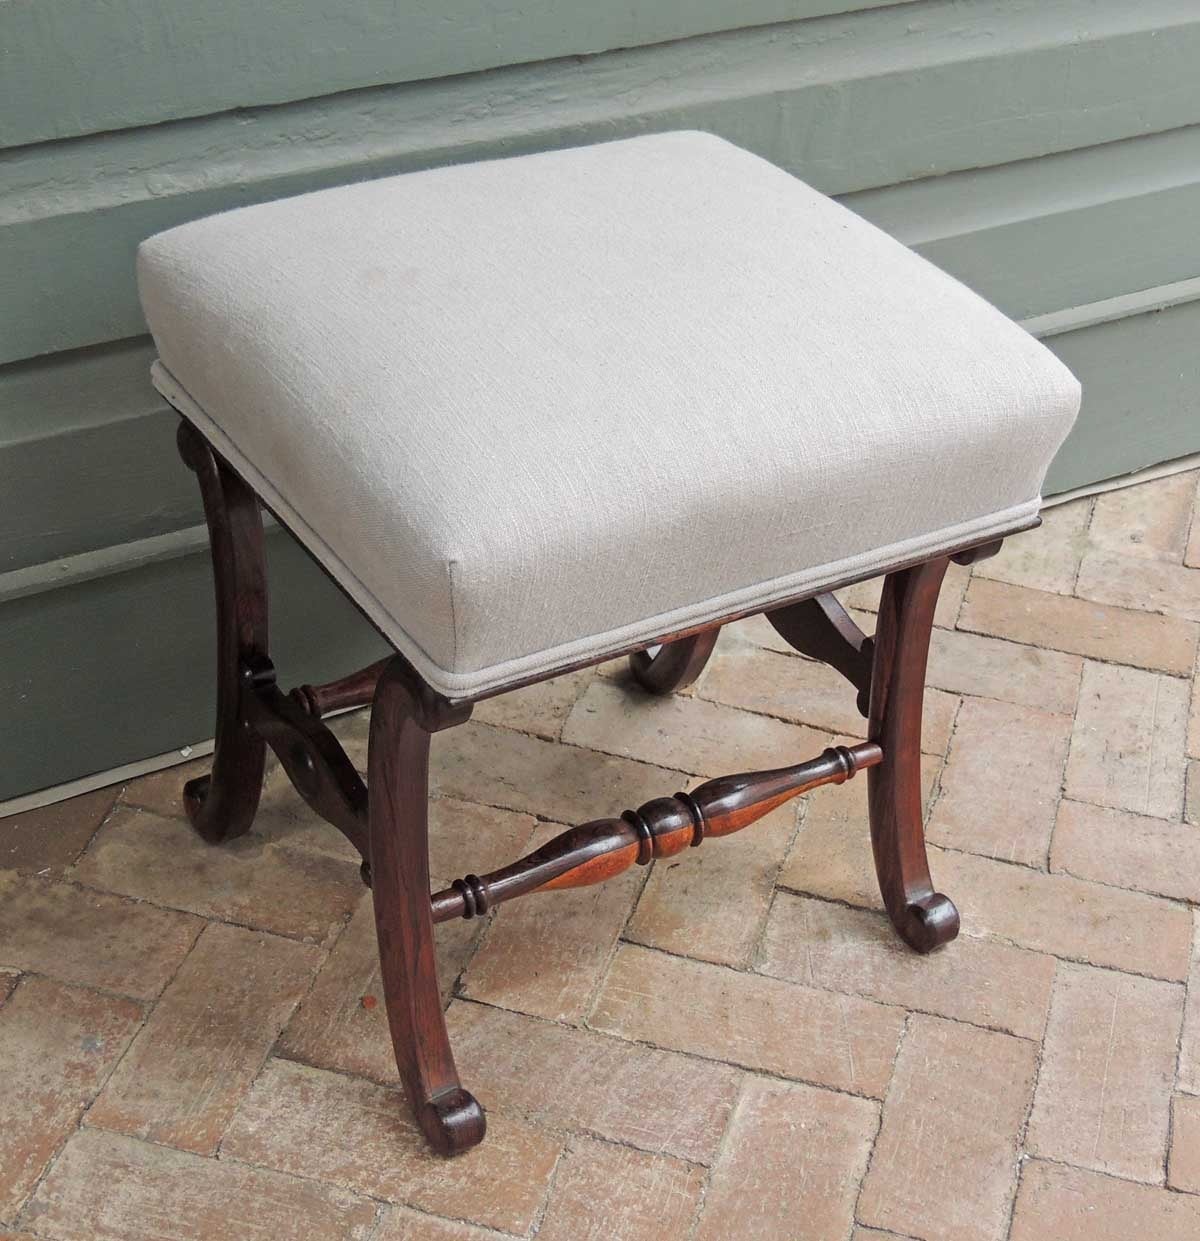 This wonderful stool was made in England during the first half of the 19th century. This stool has a recently reupholstered grey seat above scroll legs with carved side stretchers. There are two hand-turned center spindles made of rosewood and